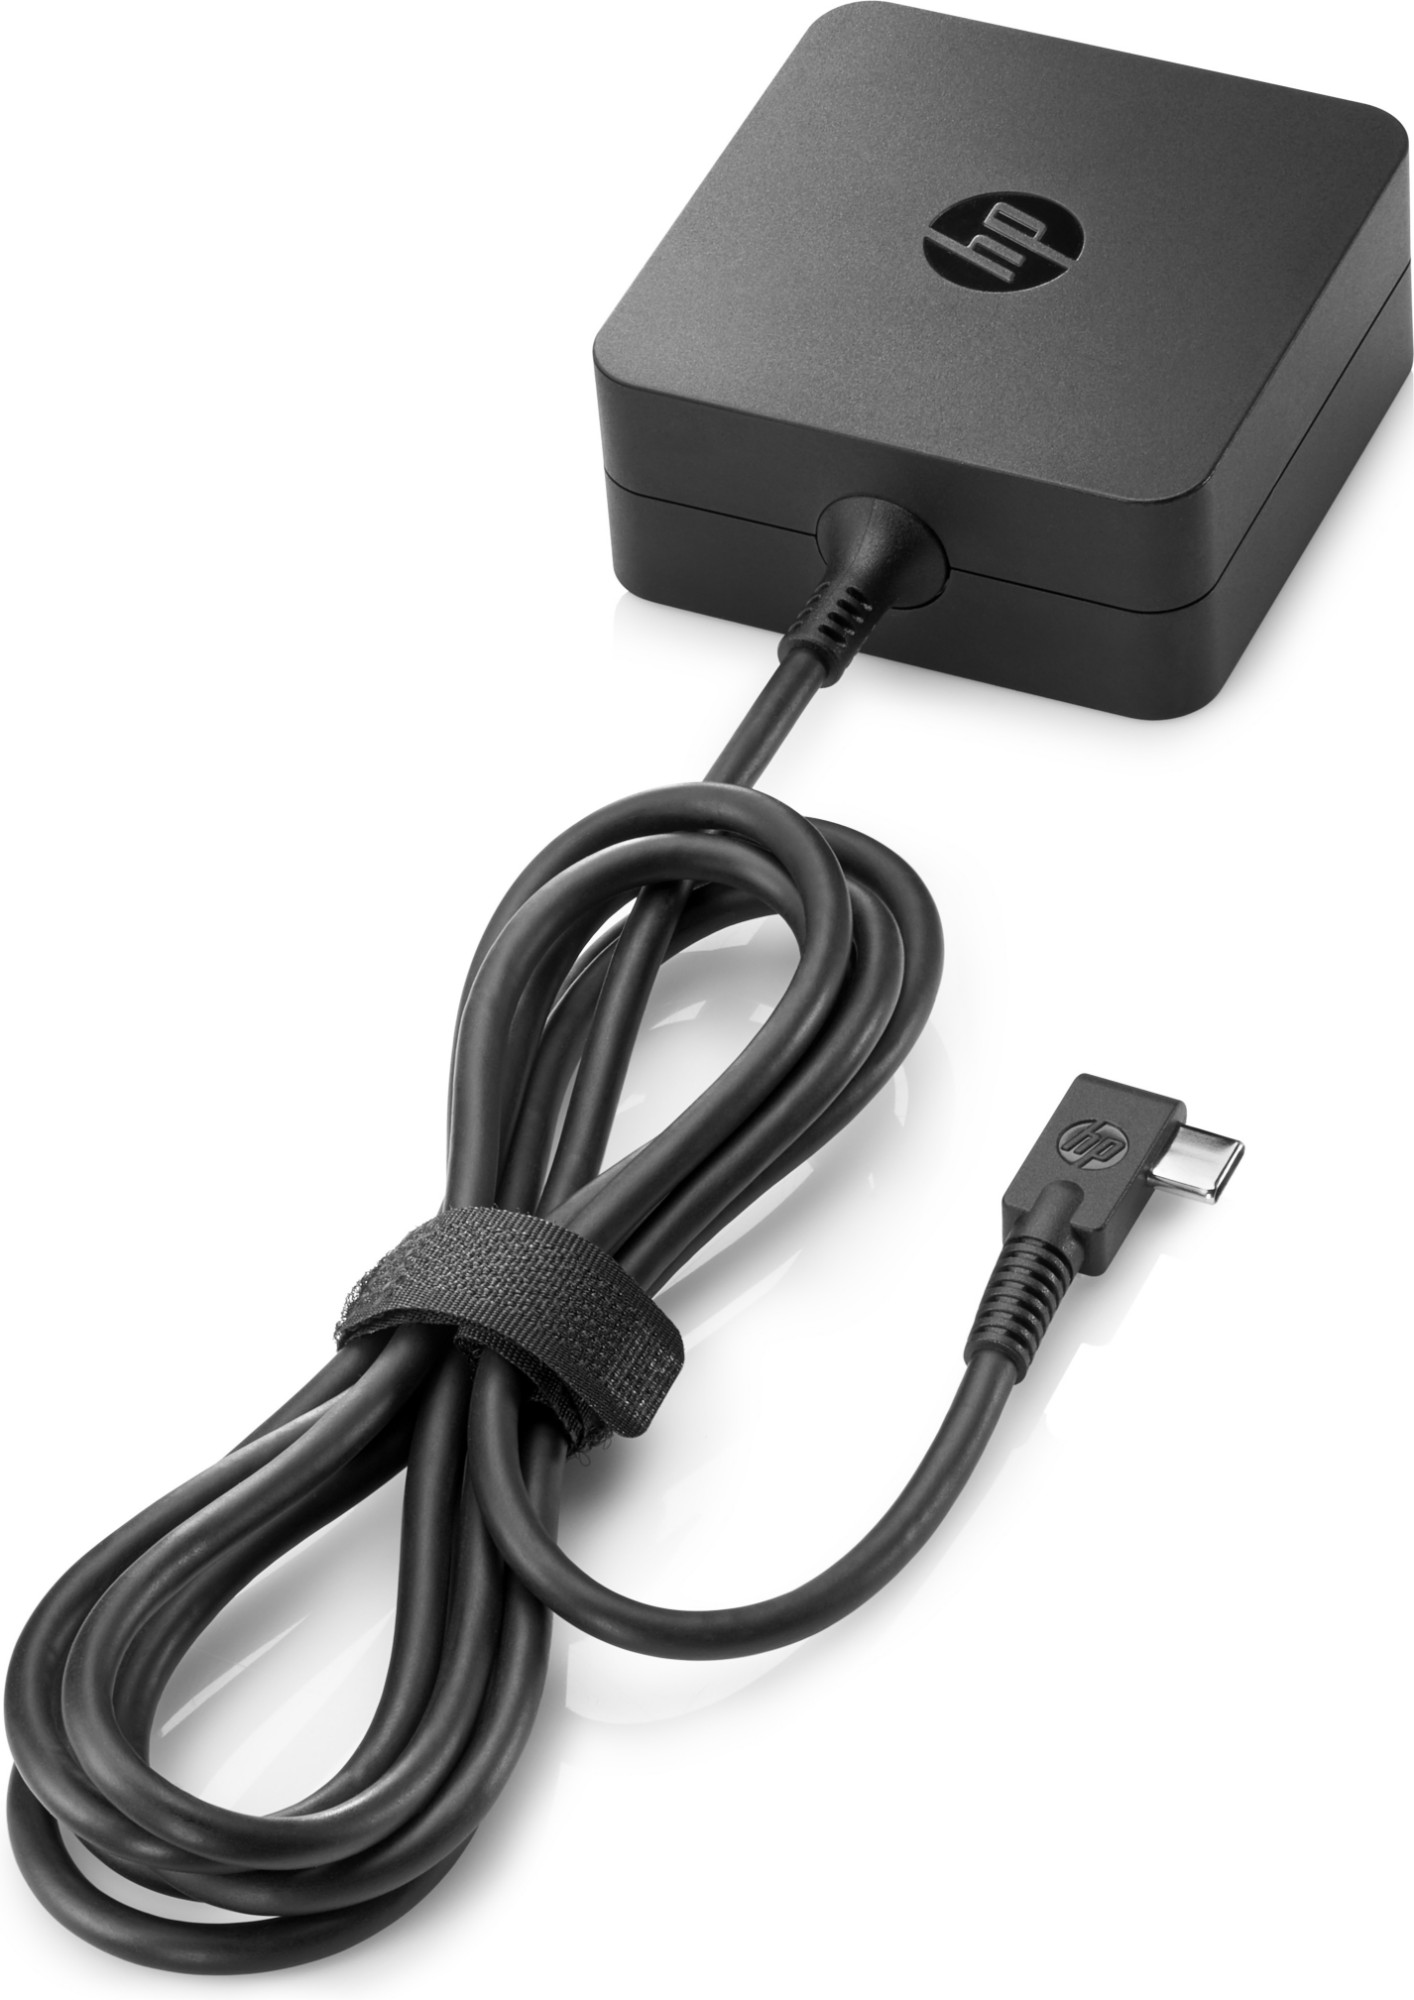 Hp 45w Usb Type C Ac Adapter 204 In Distributorwholesale Stock For Resellers To Sell Stock 5834